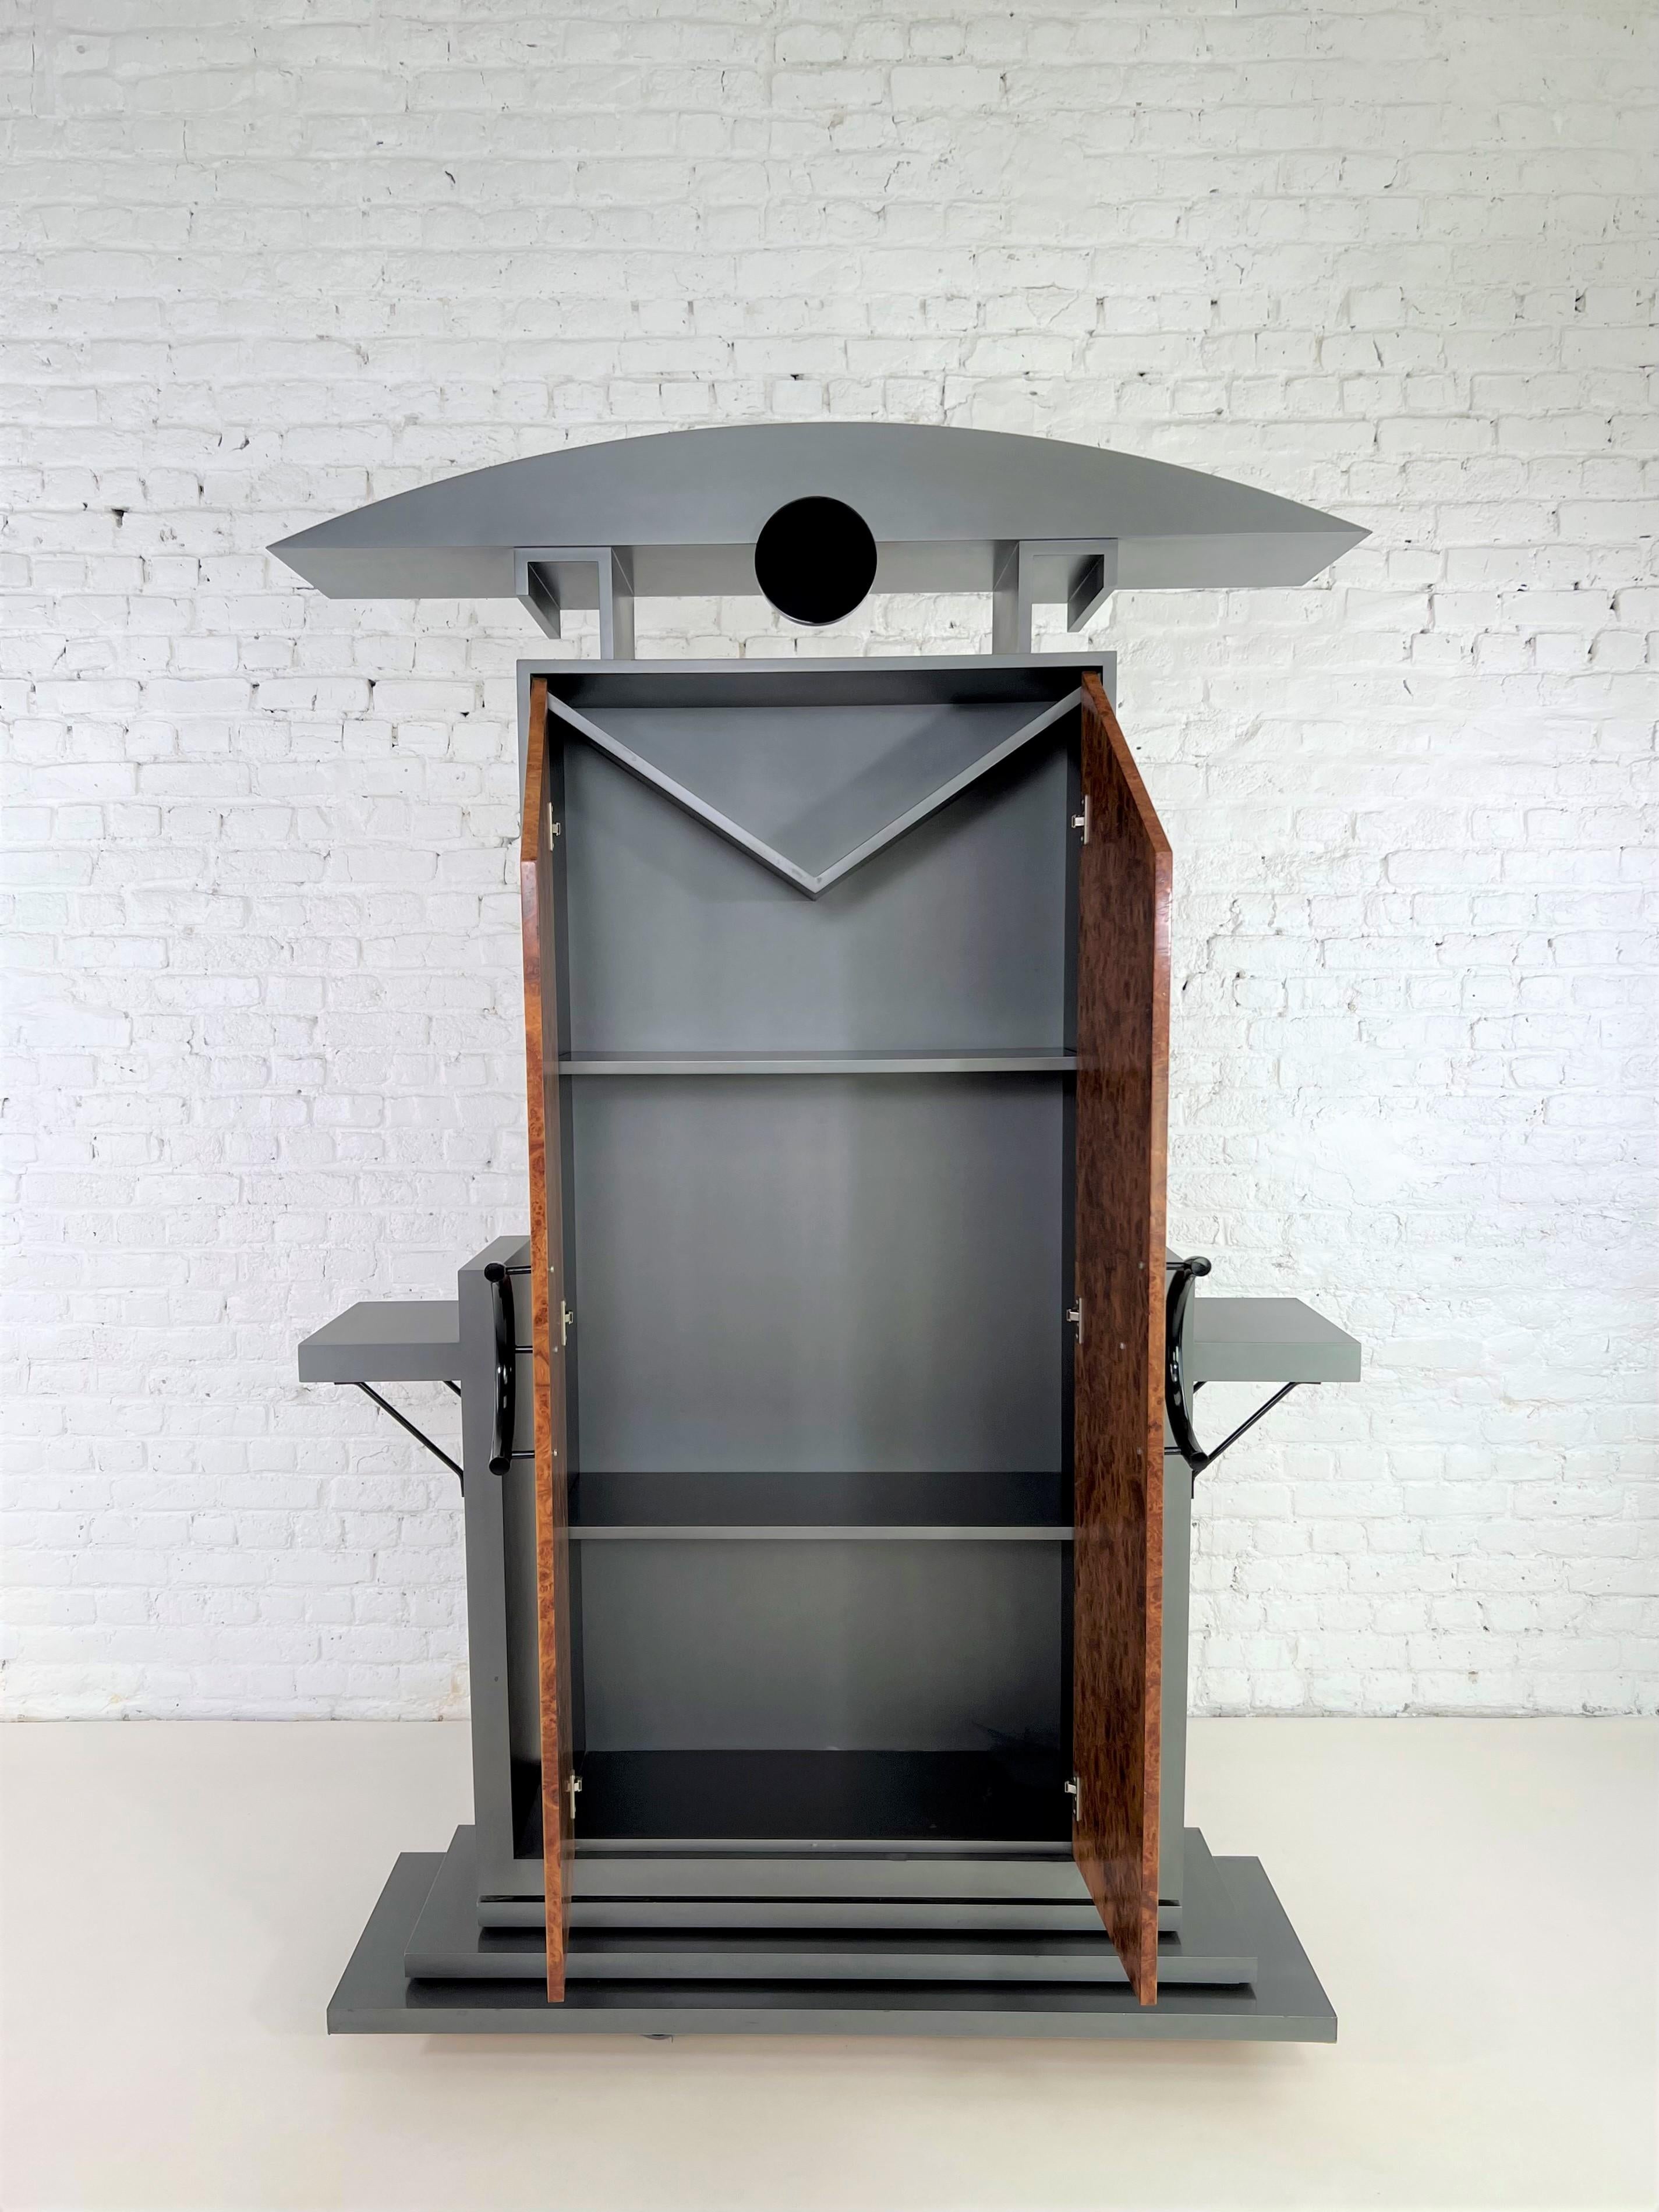 1980s Italian Design and Memphis style walnut burlwood and grey lacquer cabinet in a post modern Pagoda style shaped composed of grey lacquered wooden base, walnut burlwood doors opening on shelves and black metal finishes.